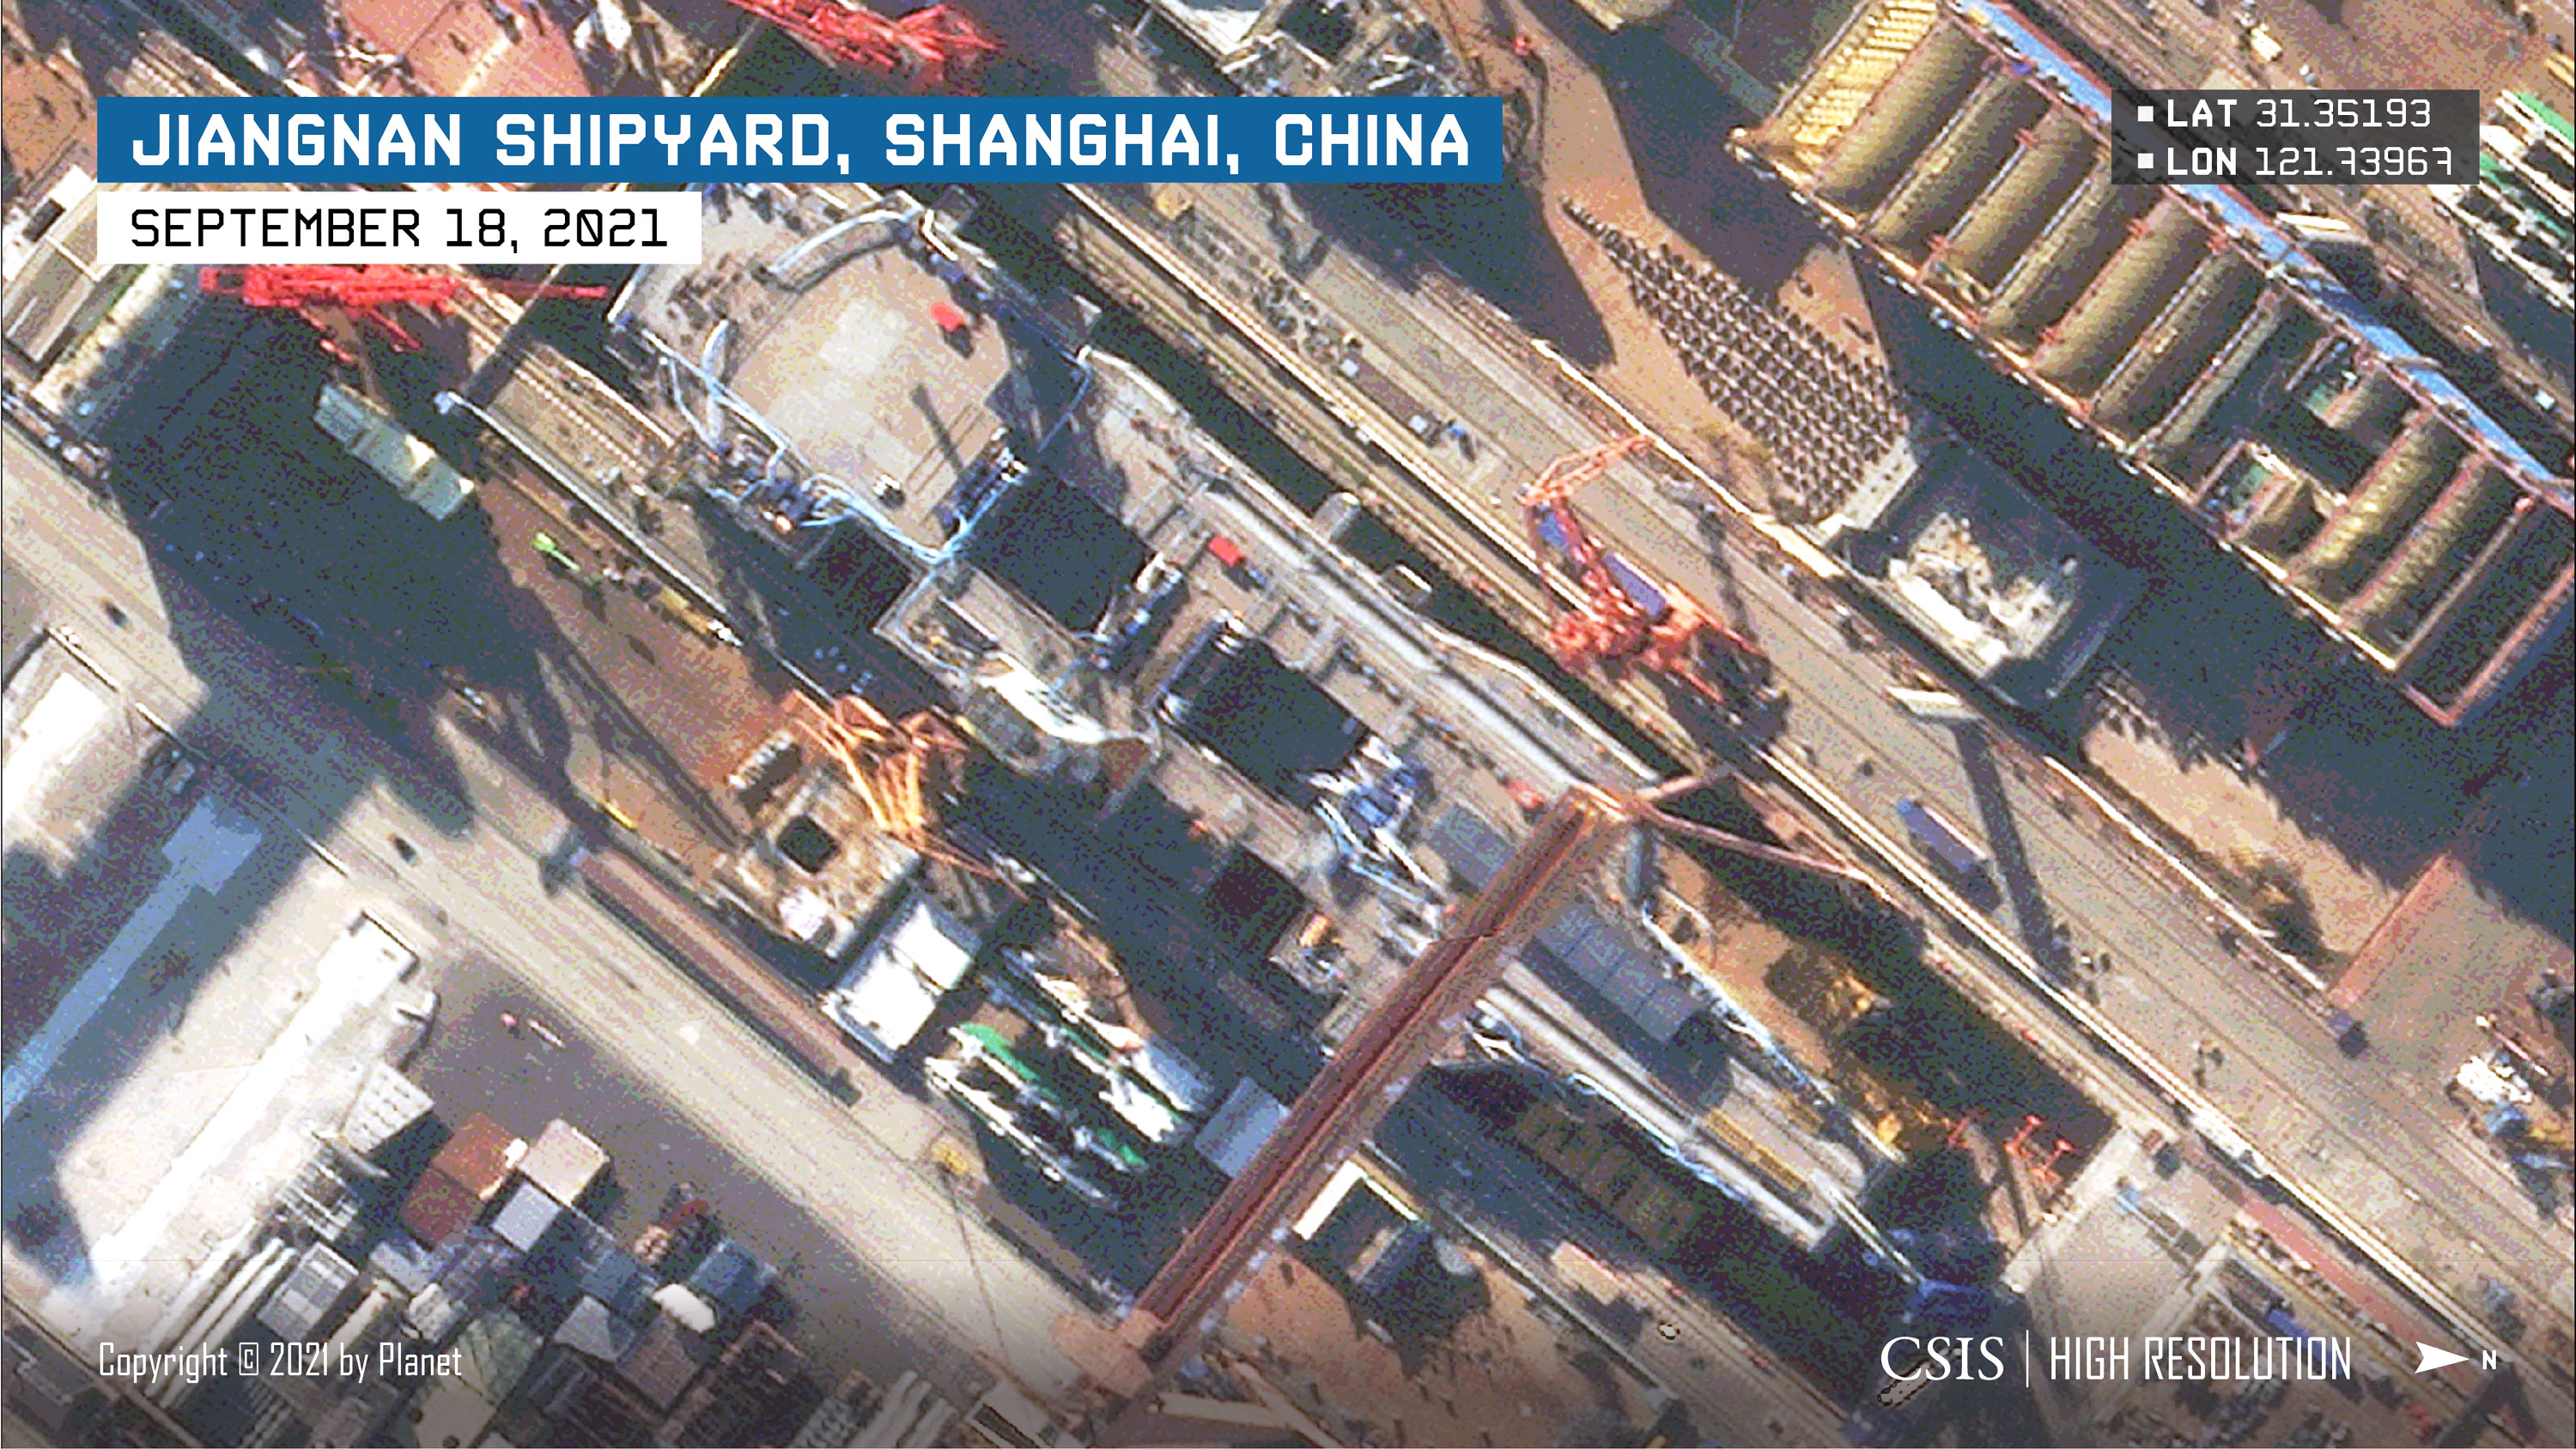 The Type 003 appears to have catapult technology to launch aircraft, according to analysts.